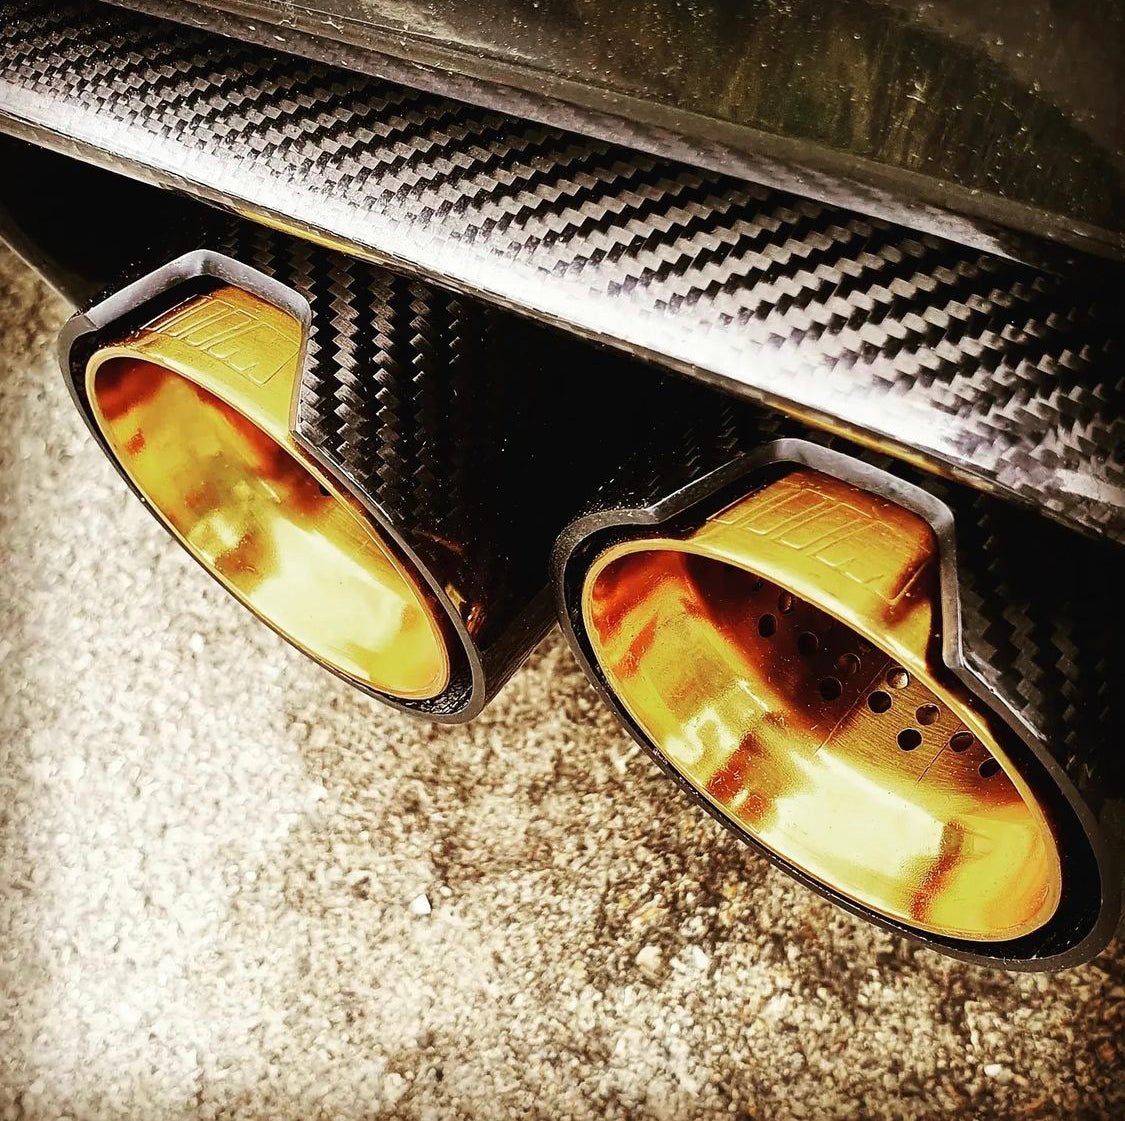 BMW E90 E92 M3 08-13 Rear Section Exhaust Systems Polished Bevel Edge Tips